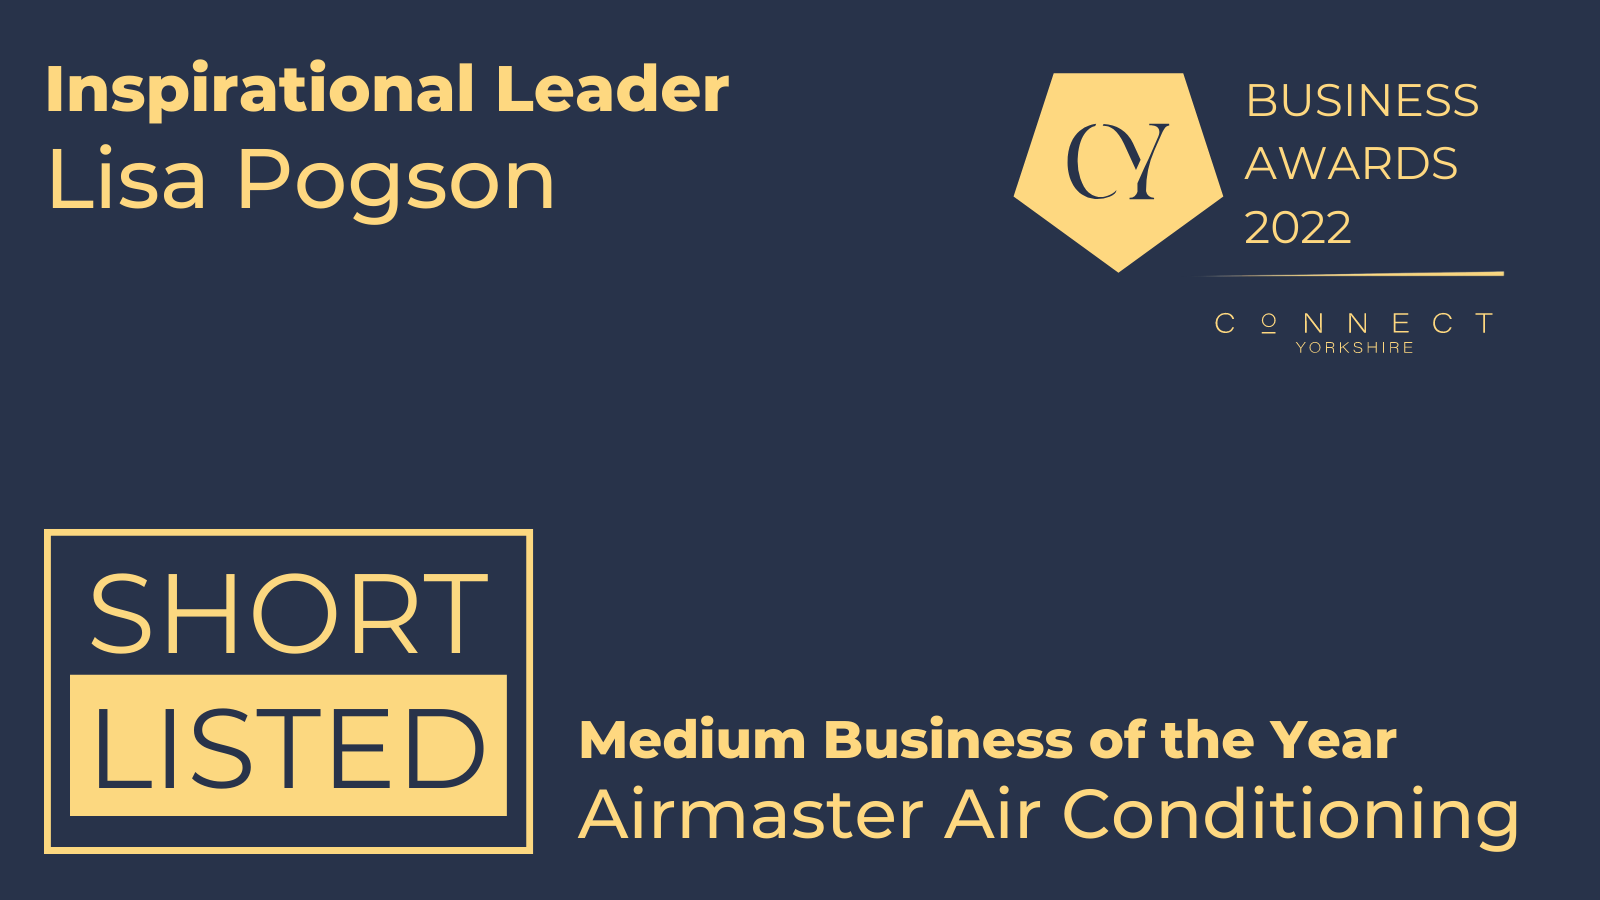 Image for Airmaster and MD, Lisa Pogson shortlisted at Connect Yorkshire Awards